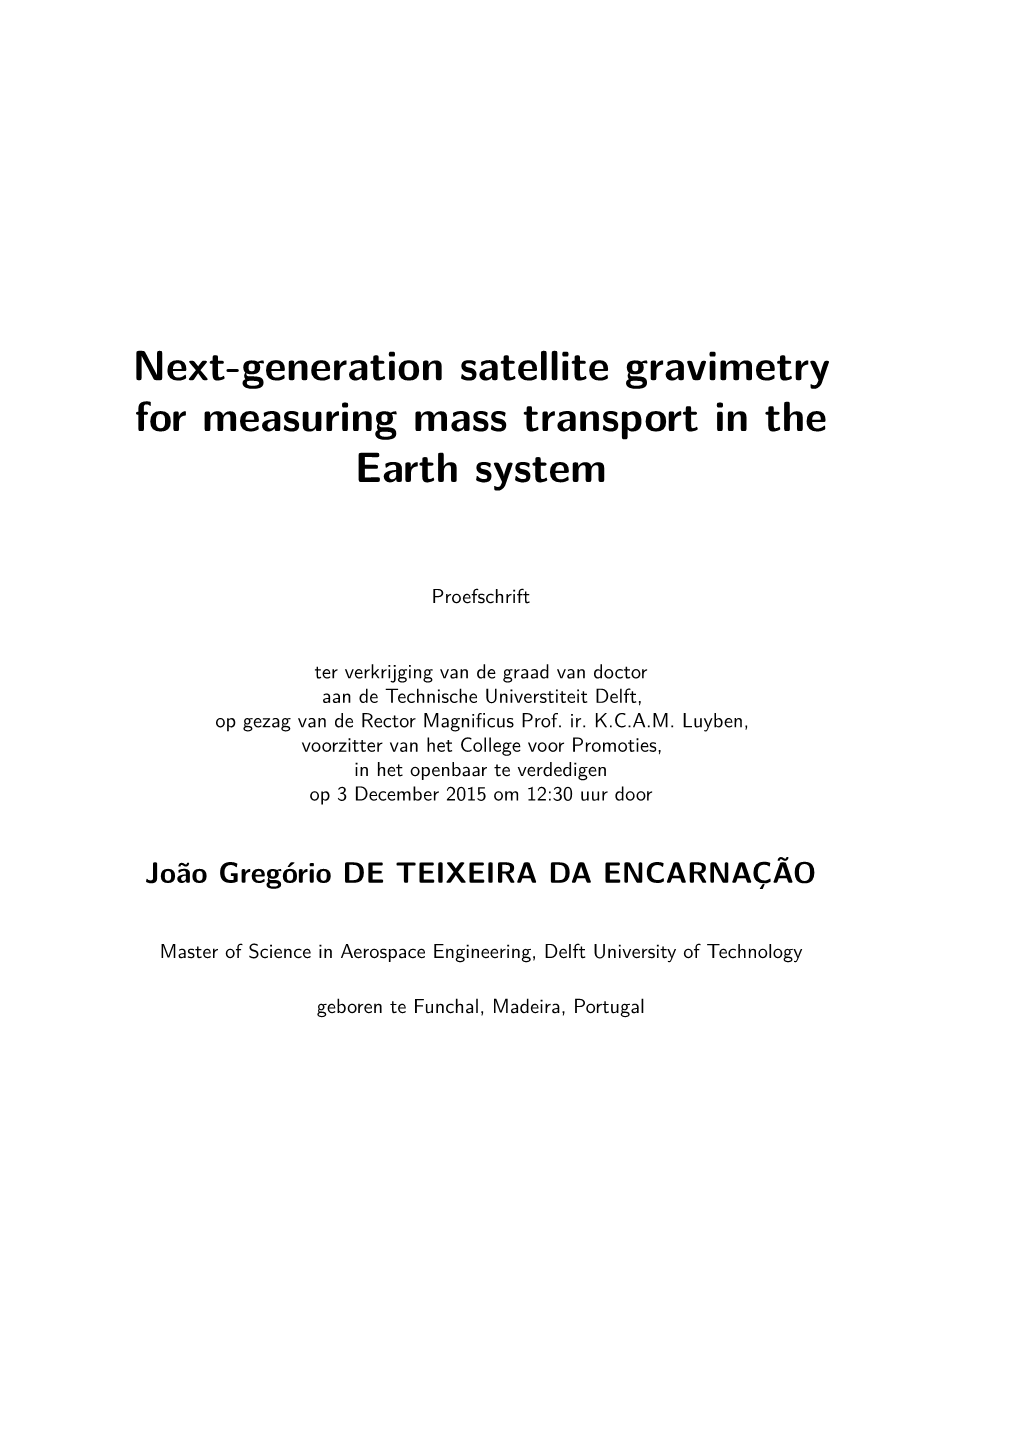 Next-Generation Satellite Gravimetry for Measuring Mass Transport in the Earth System